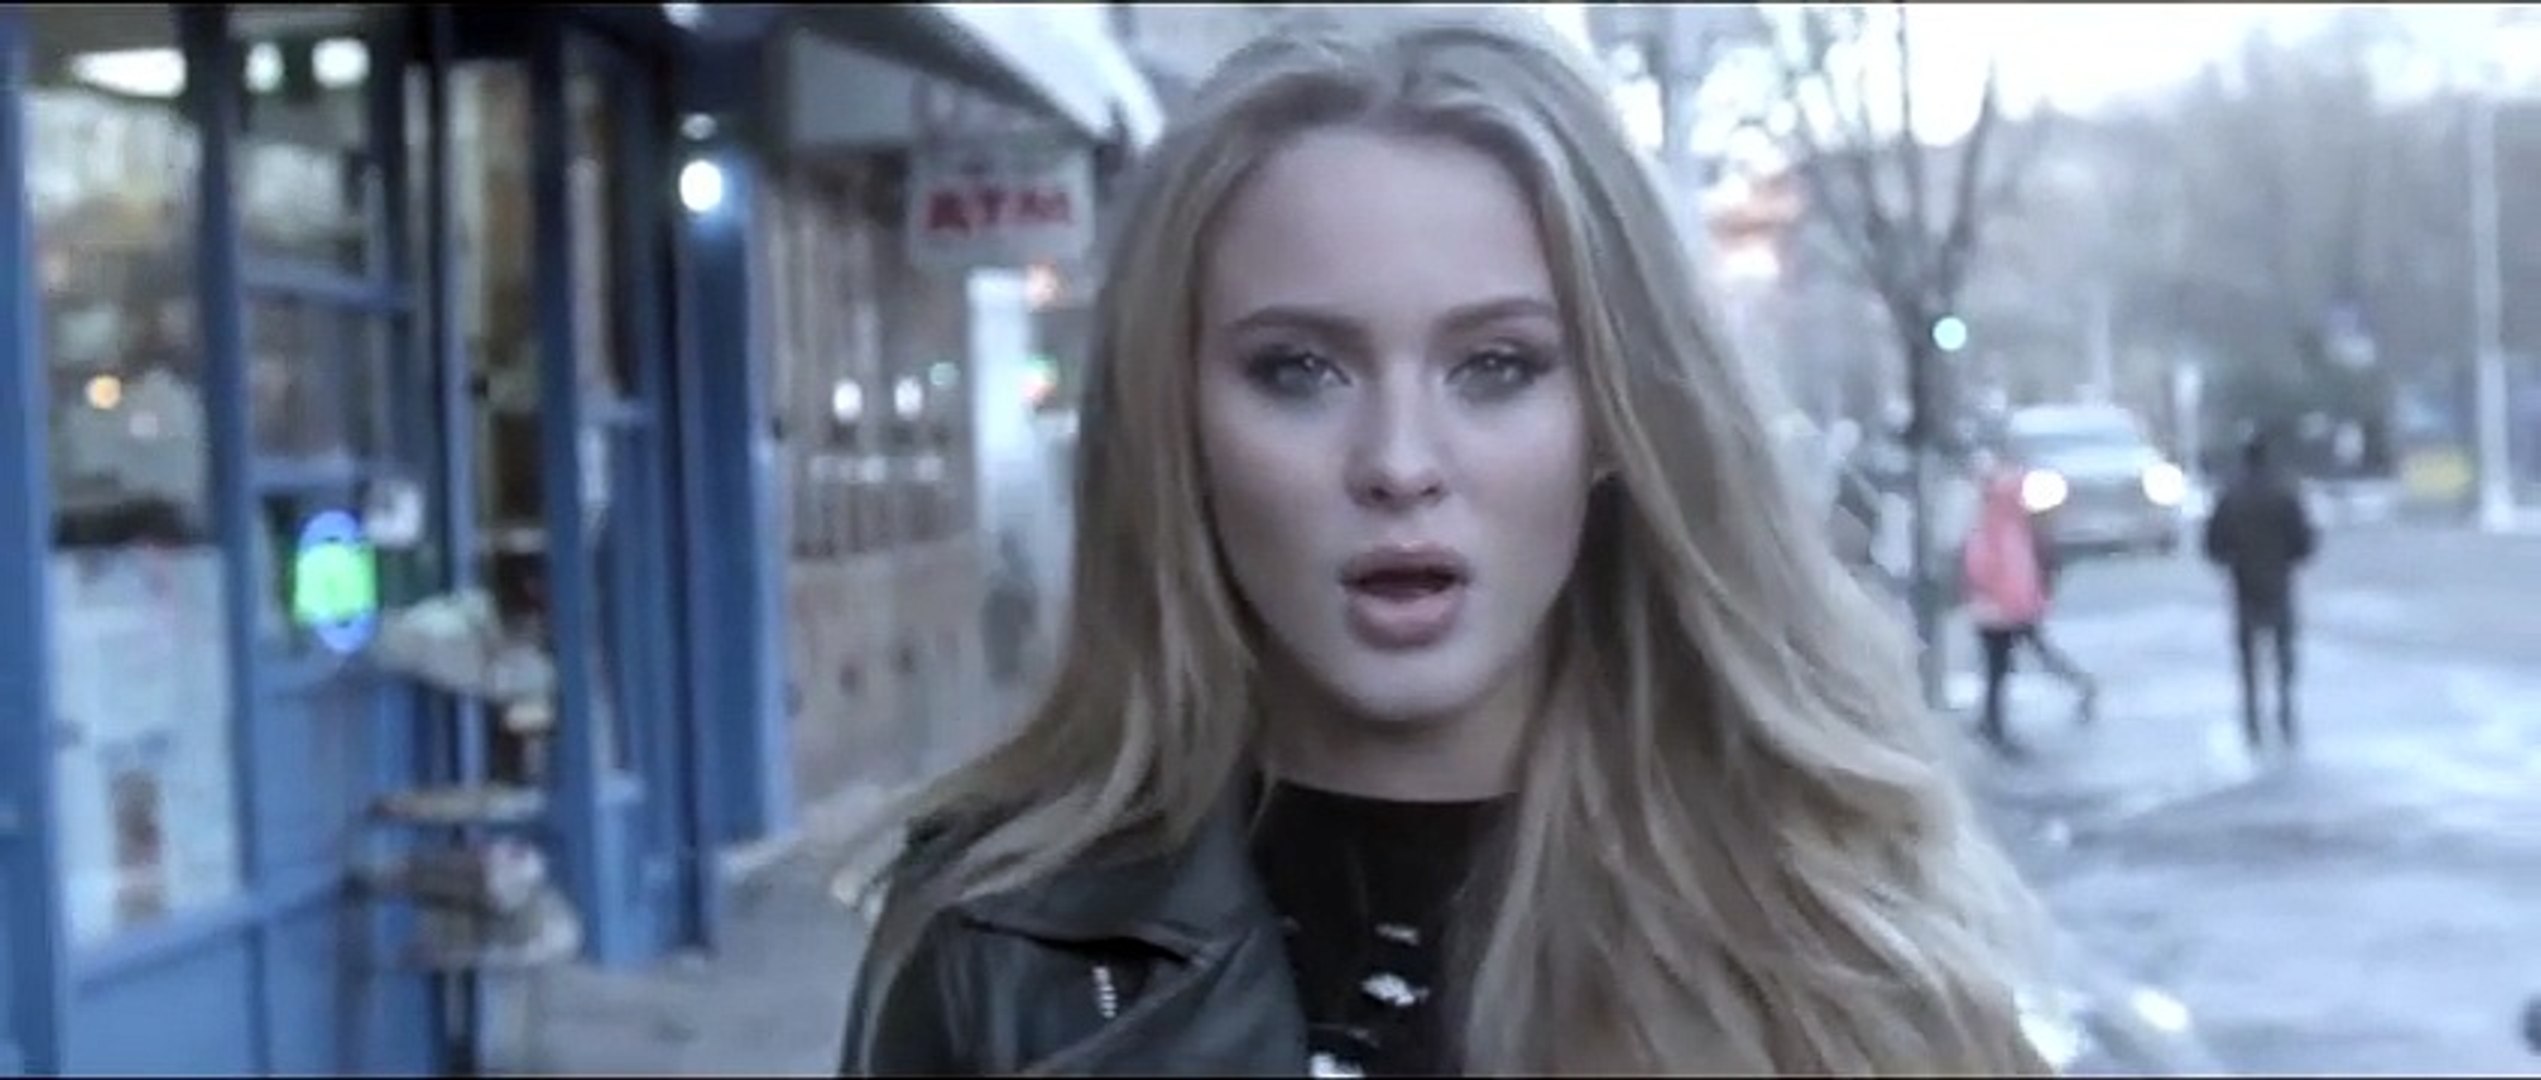 Zara Larsson - Uncover - Dailymotion Video